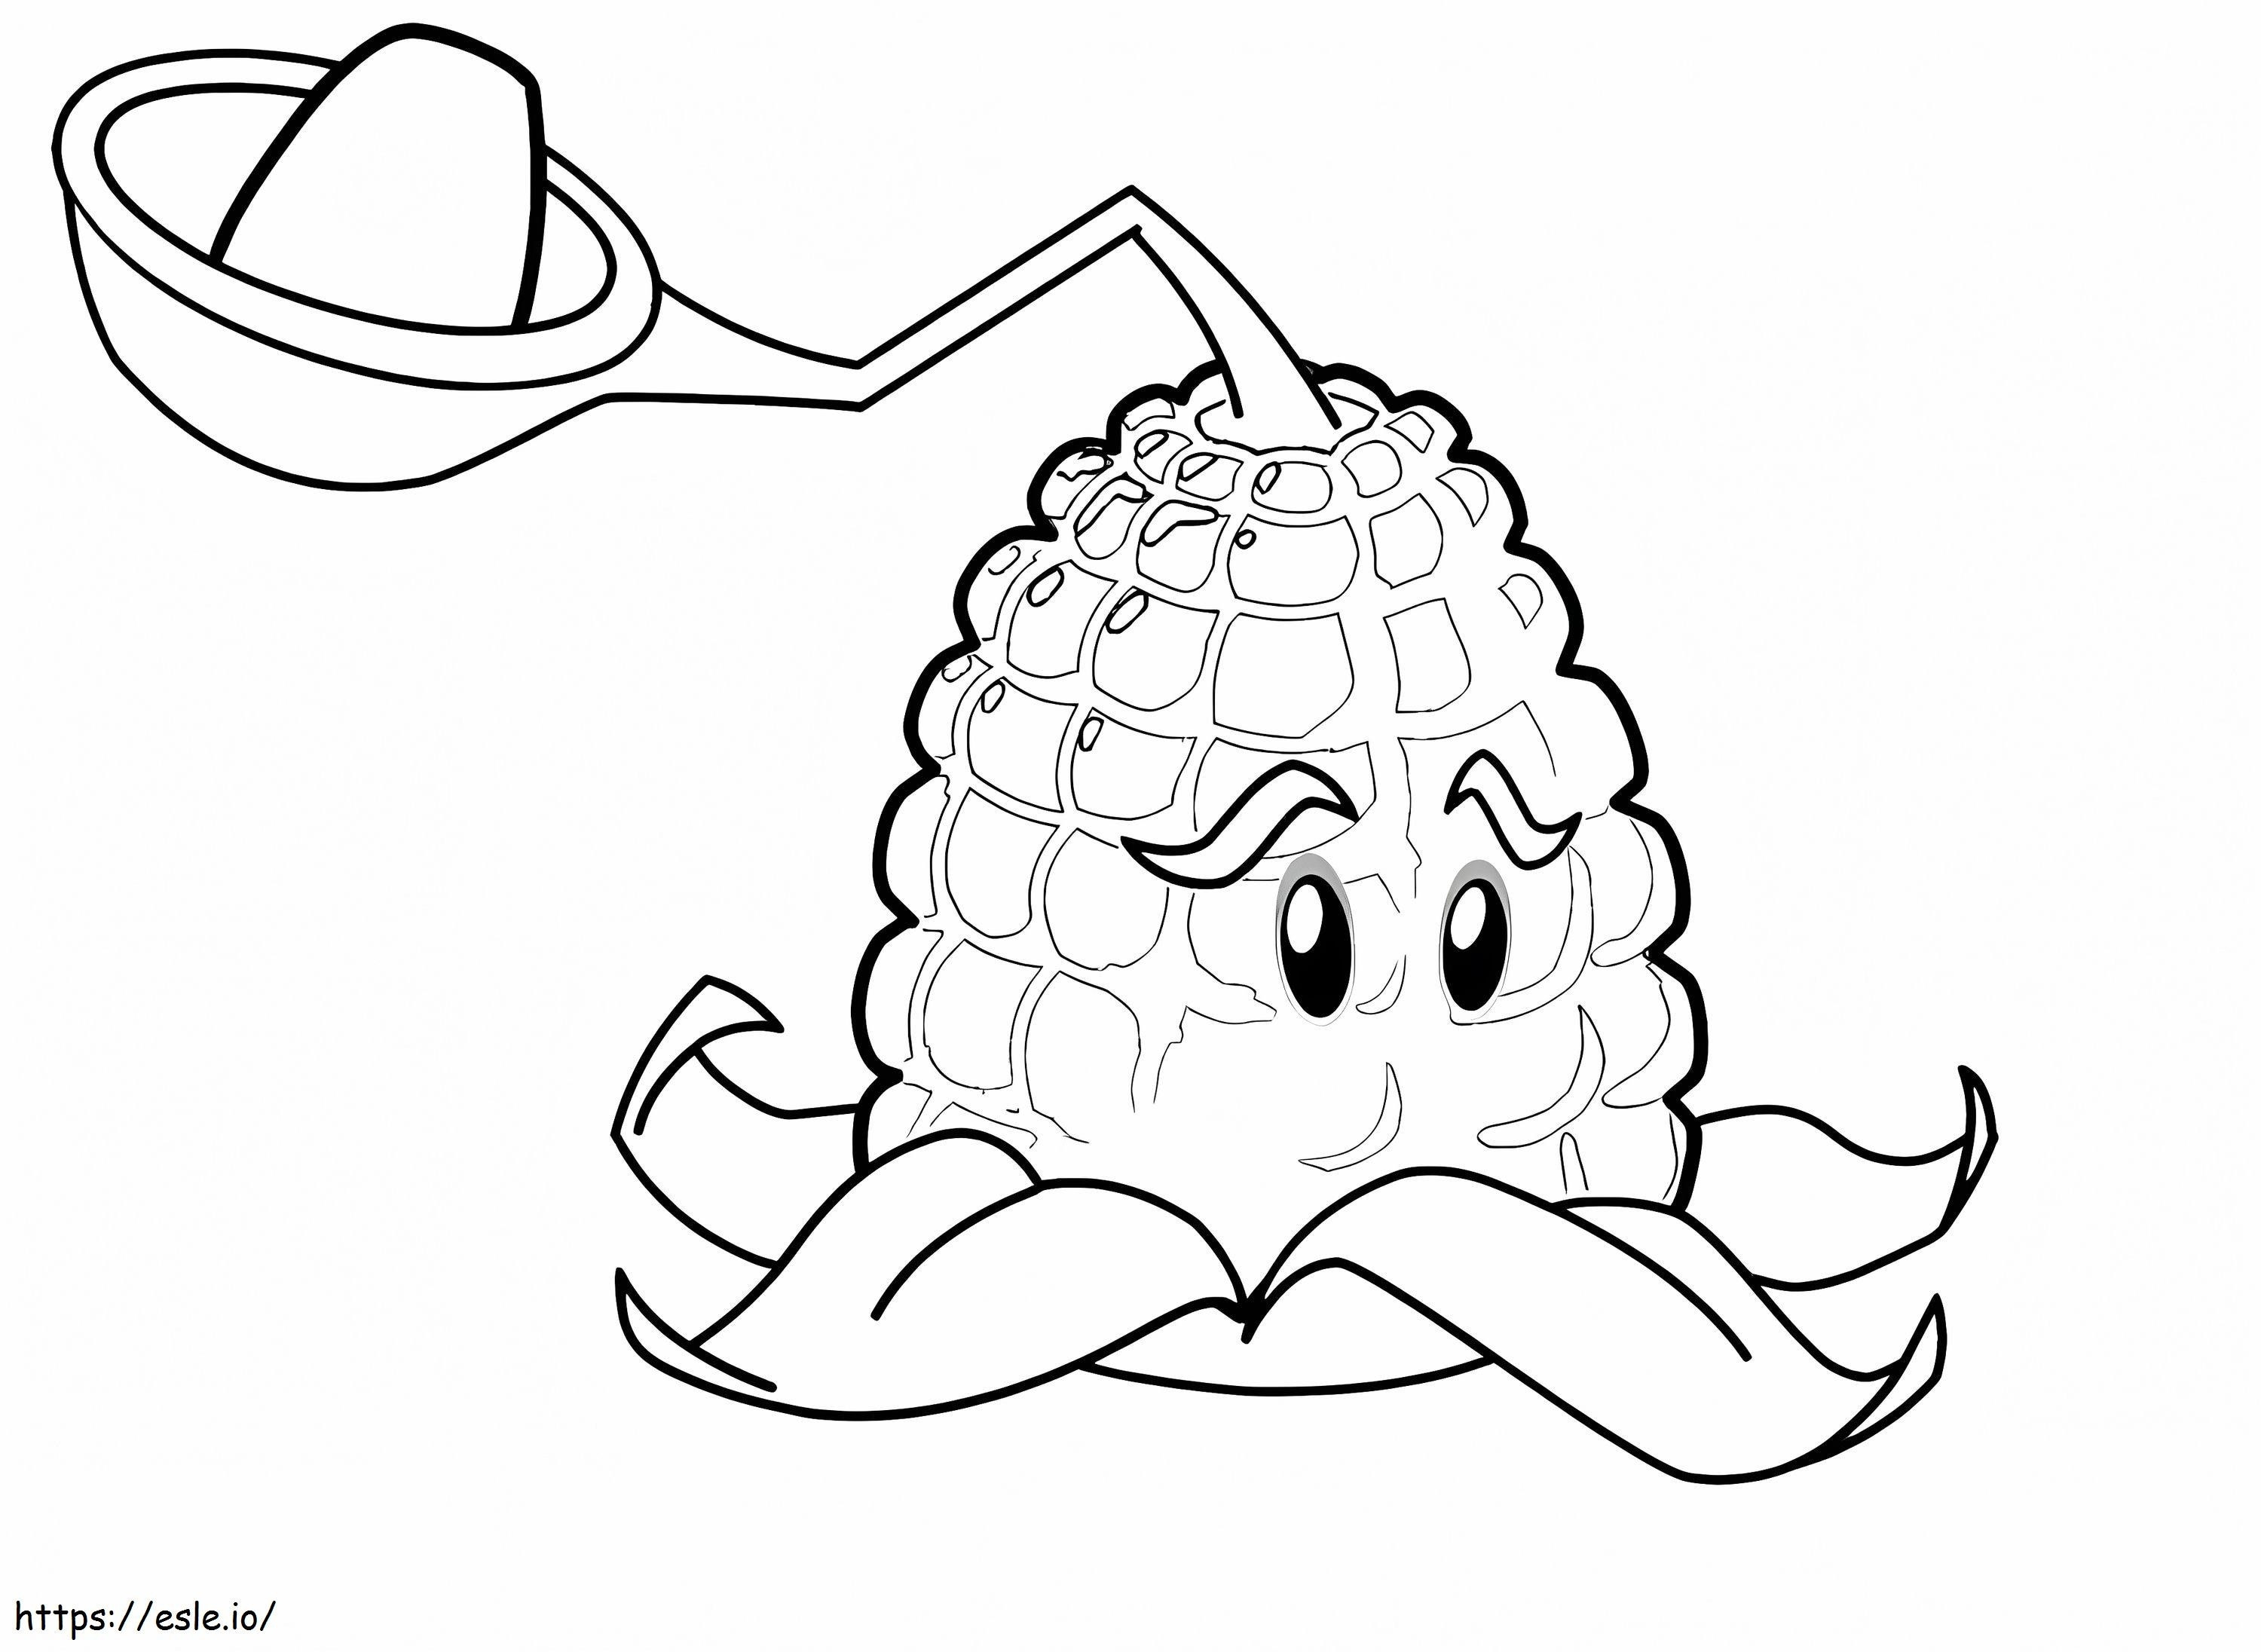 Pulido Of The Nucleus In Plants Vs Zombies coloring page